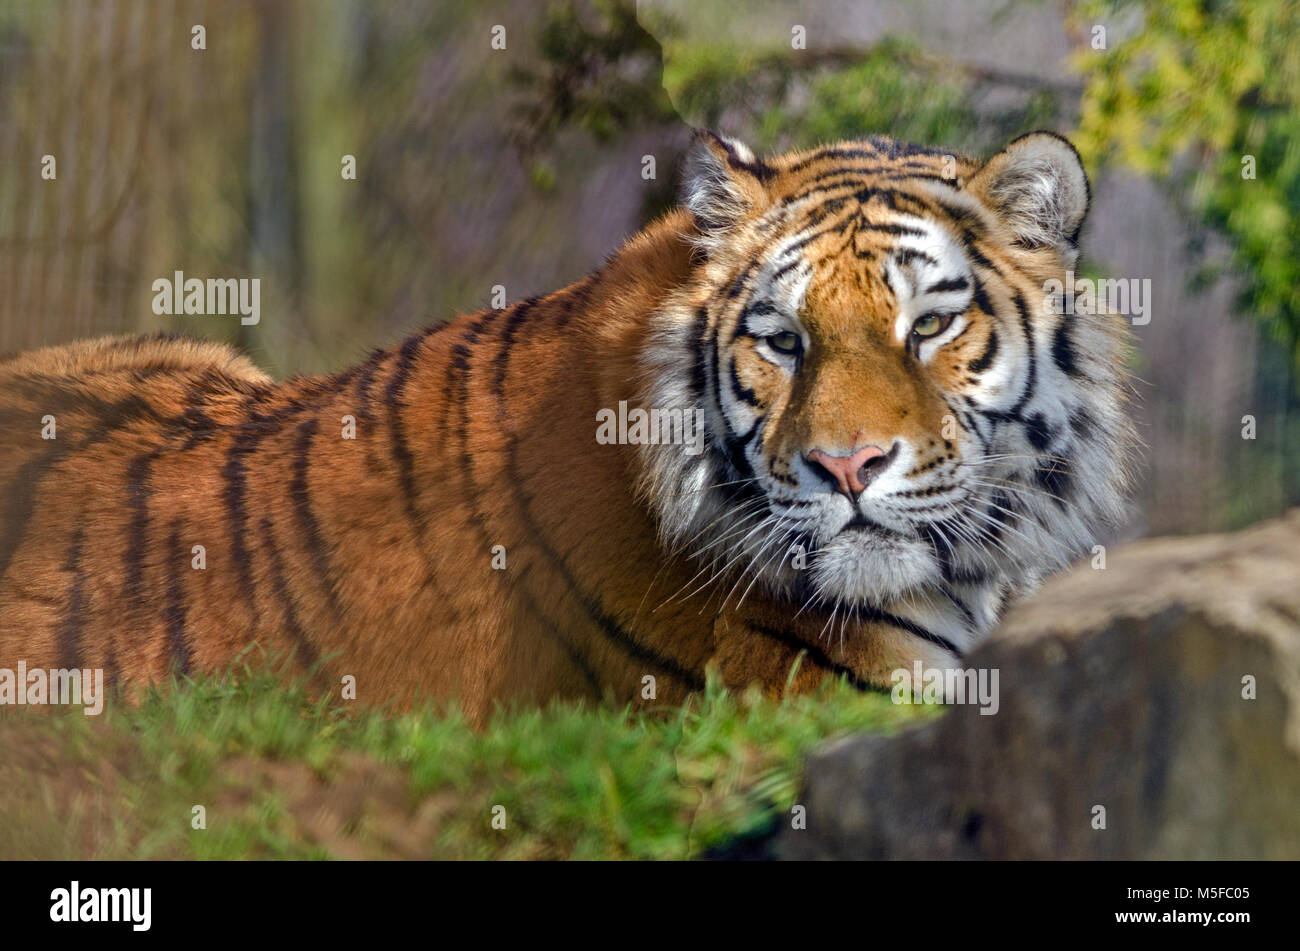 An Amur Tiger rests and surveys its territory Stock Photo